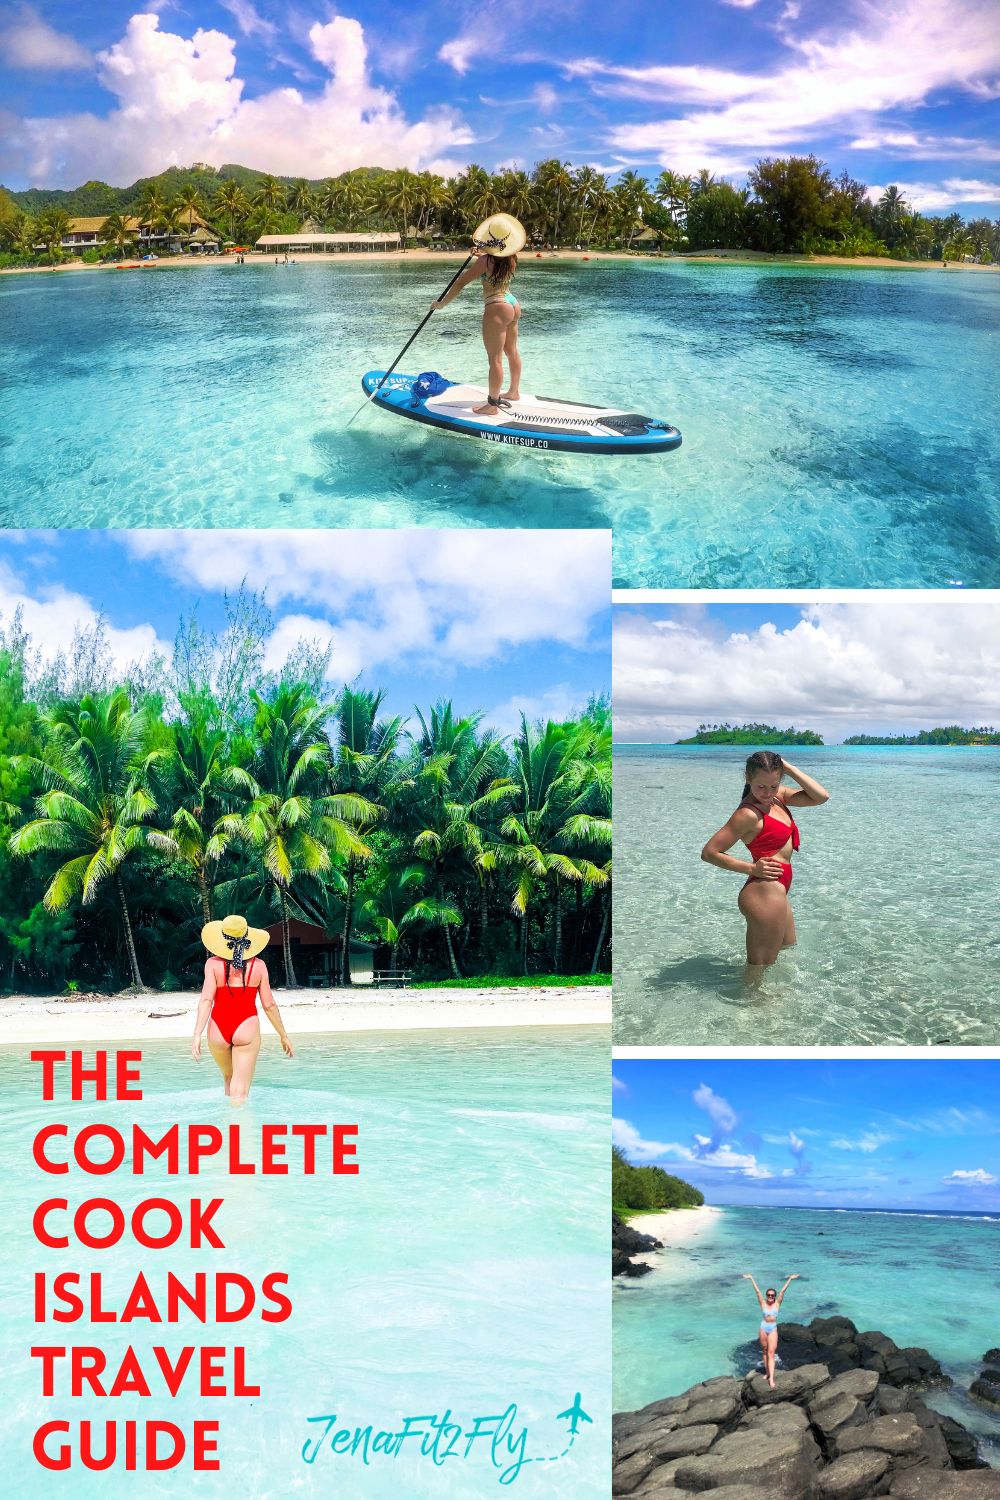 The complete Cook Islands travel guide. The stunning Cook Islands may be far, but they are well worth it! This is everything you'll need to know to book your off the beaten path island adventure. Here's the Complete Cook Islands travel guide full of beaches, tours, hotels, restaurants and more. A complete guide for your Cook Islands adventure. 